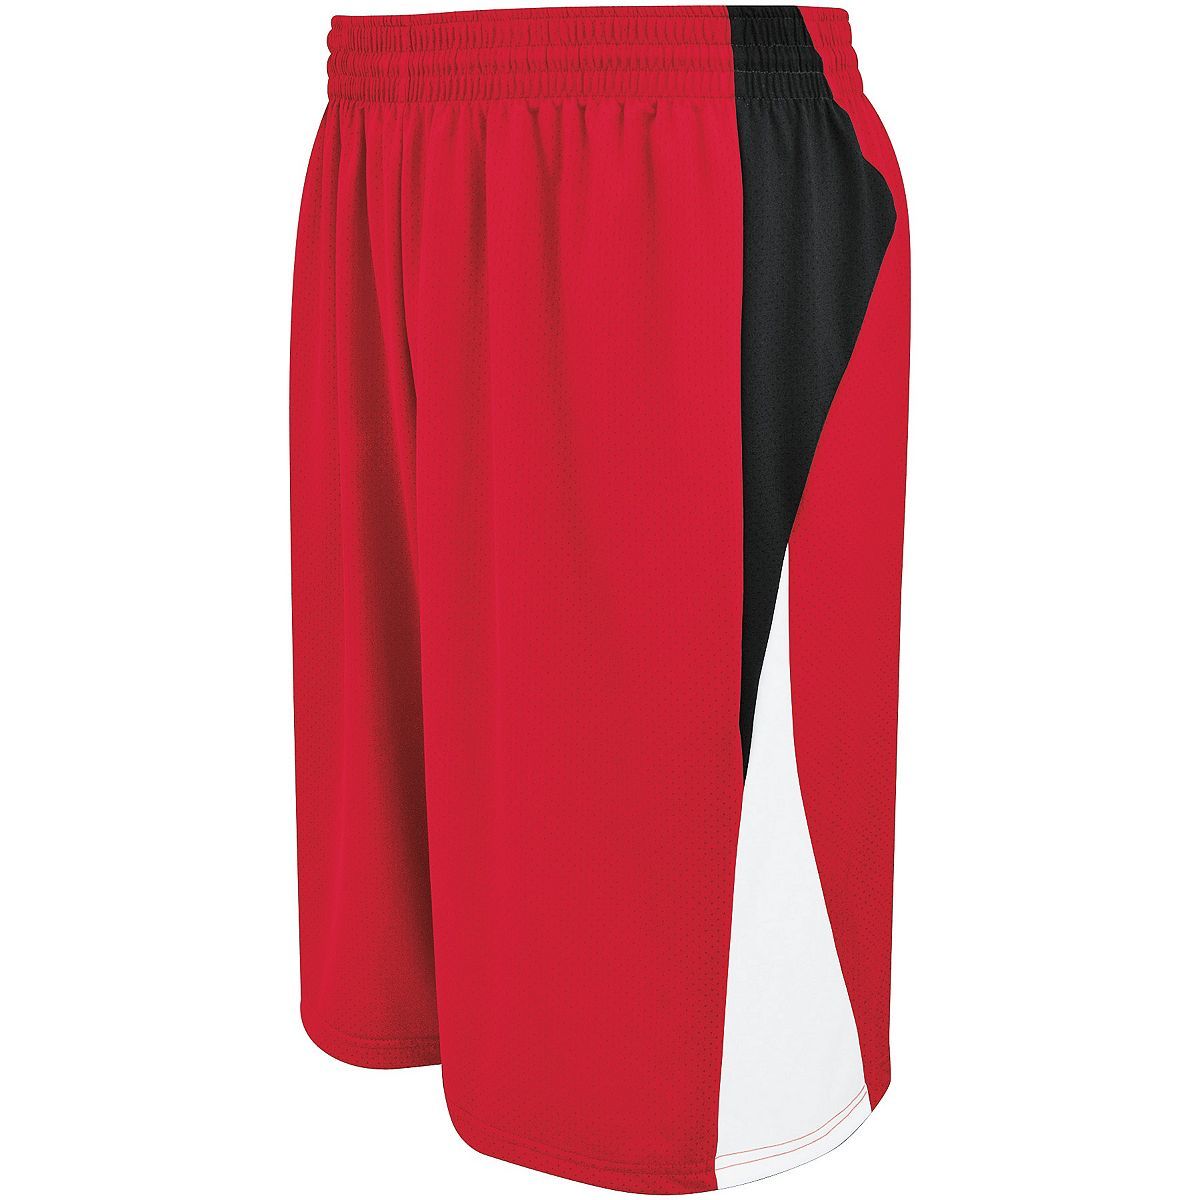 Holloway Campus Reversible Shorts in Scarlet/Black/White  -Part of the Adult, Adult-Shorts, Basketball, Holloway, All-Sports, All-Sports-1 product lines at KanaleyCreations.com